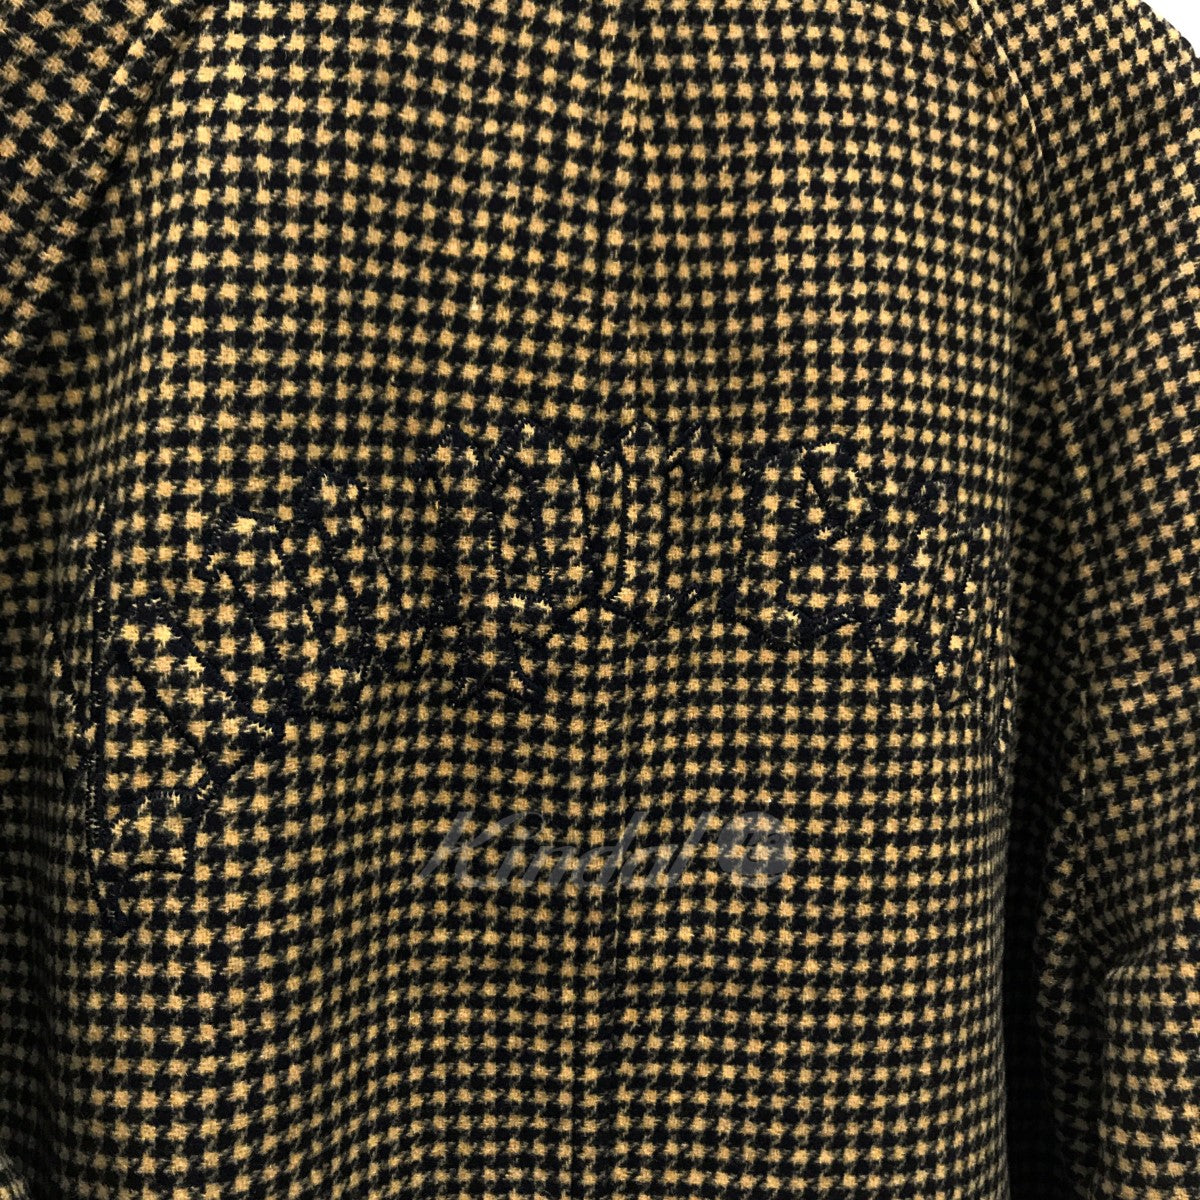 SUPREME(シュプリーム) 23AW Reversible Houndstooth Overcoat 